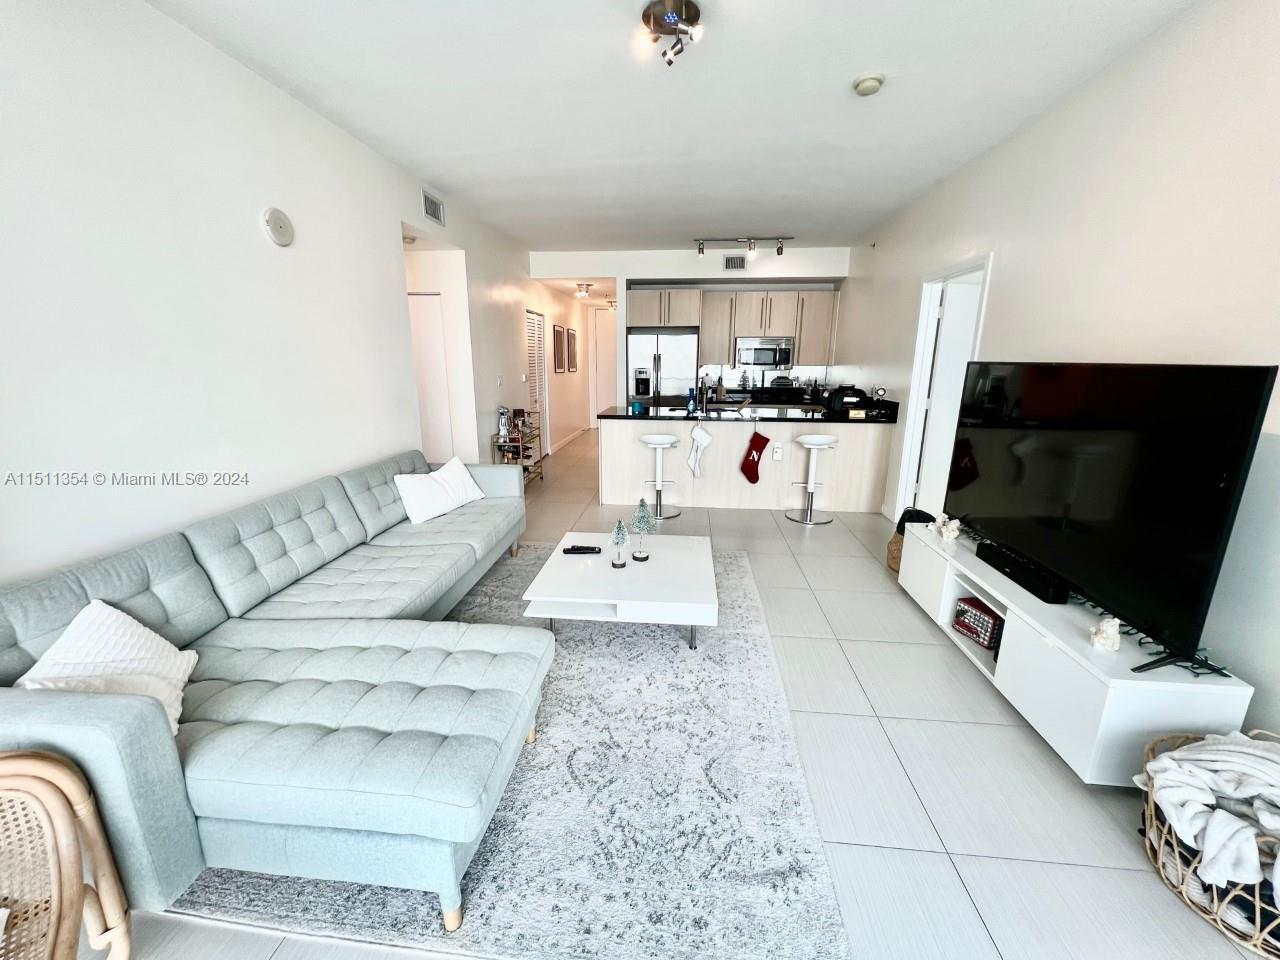 Photo 1 of Axis on Briclell Apt 3610 in Miami - MLS A11511354